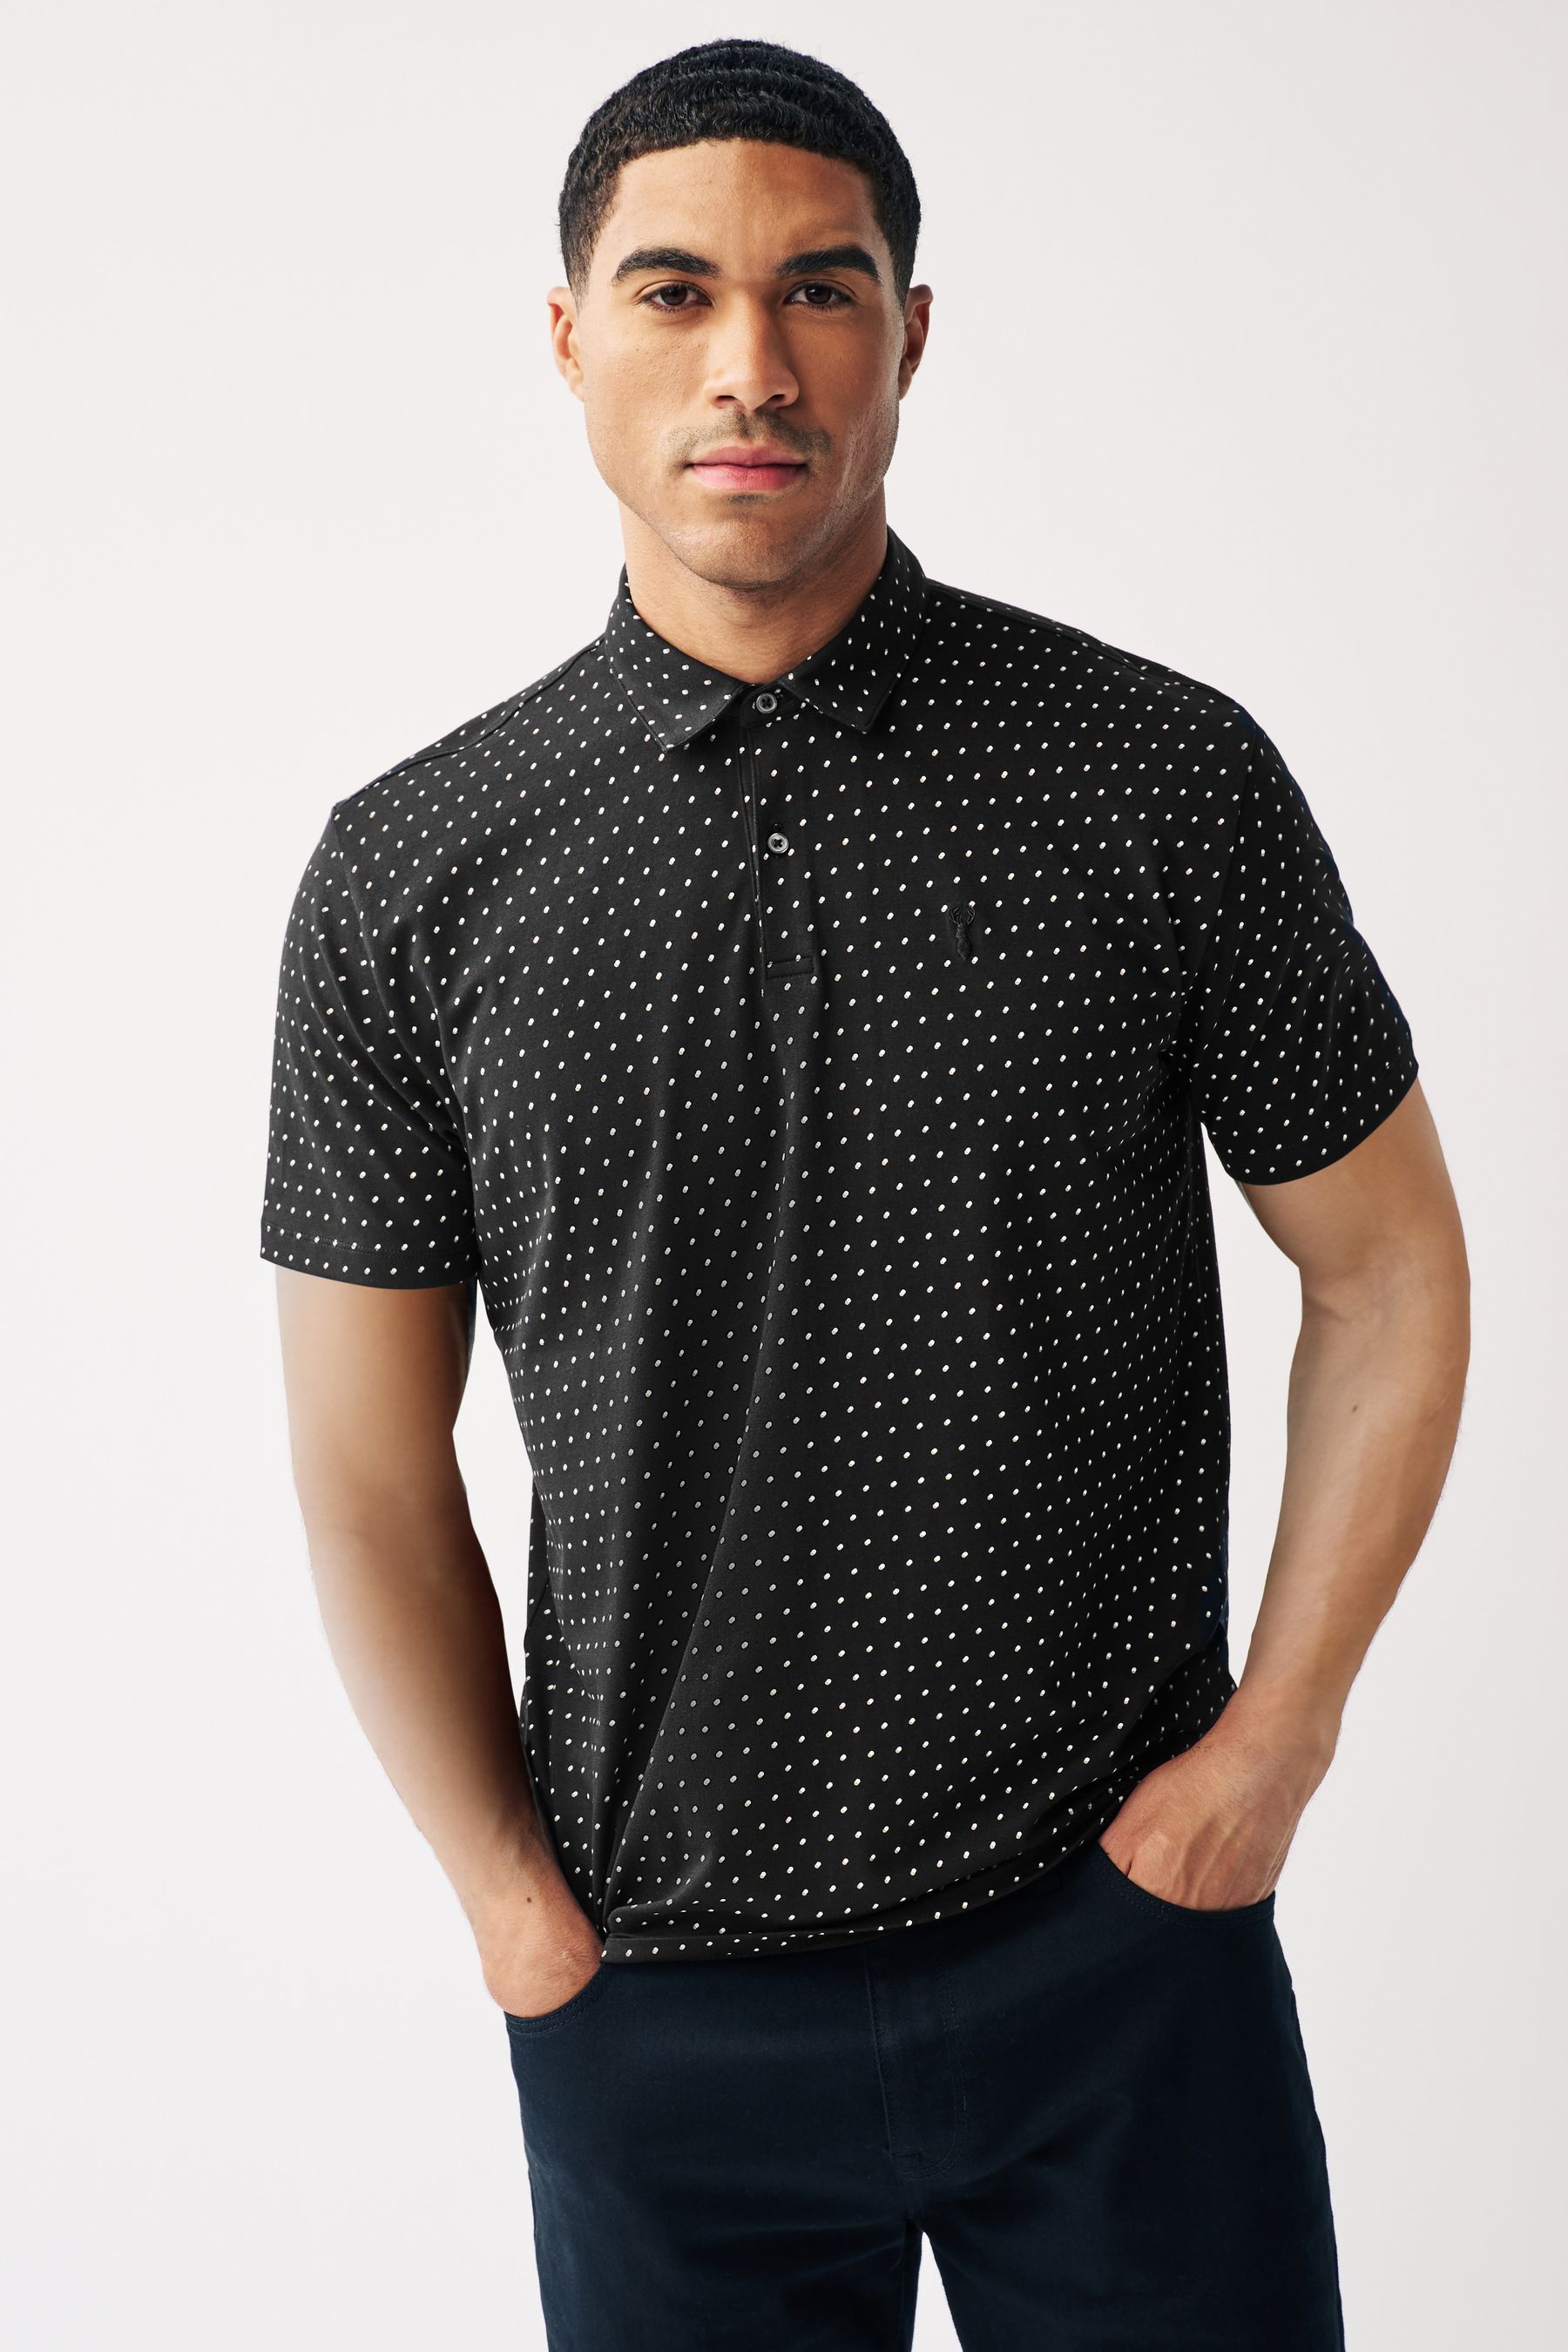 Buy Black Polka Dot Polo Shirt from the Next UK online shop